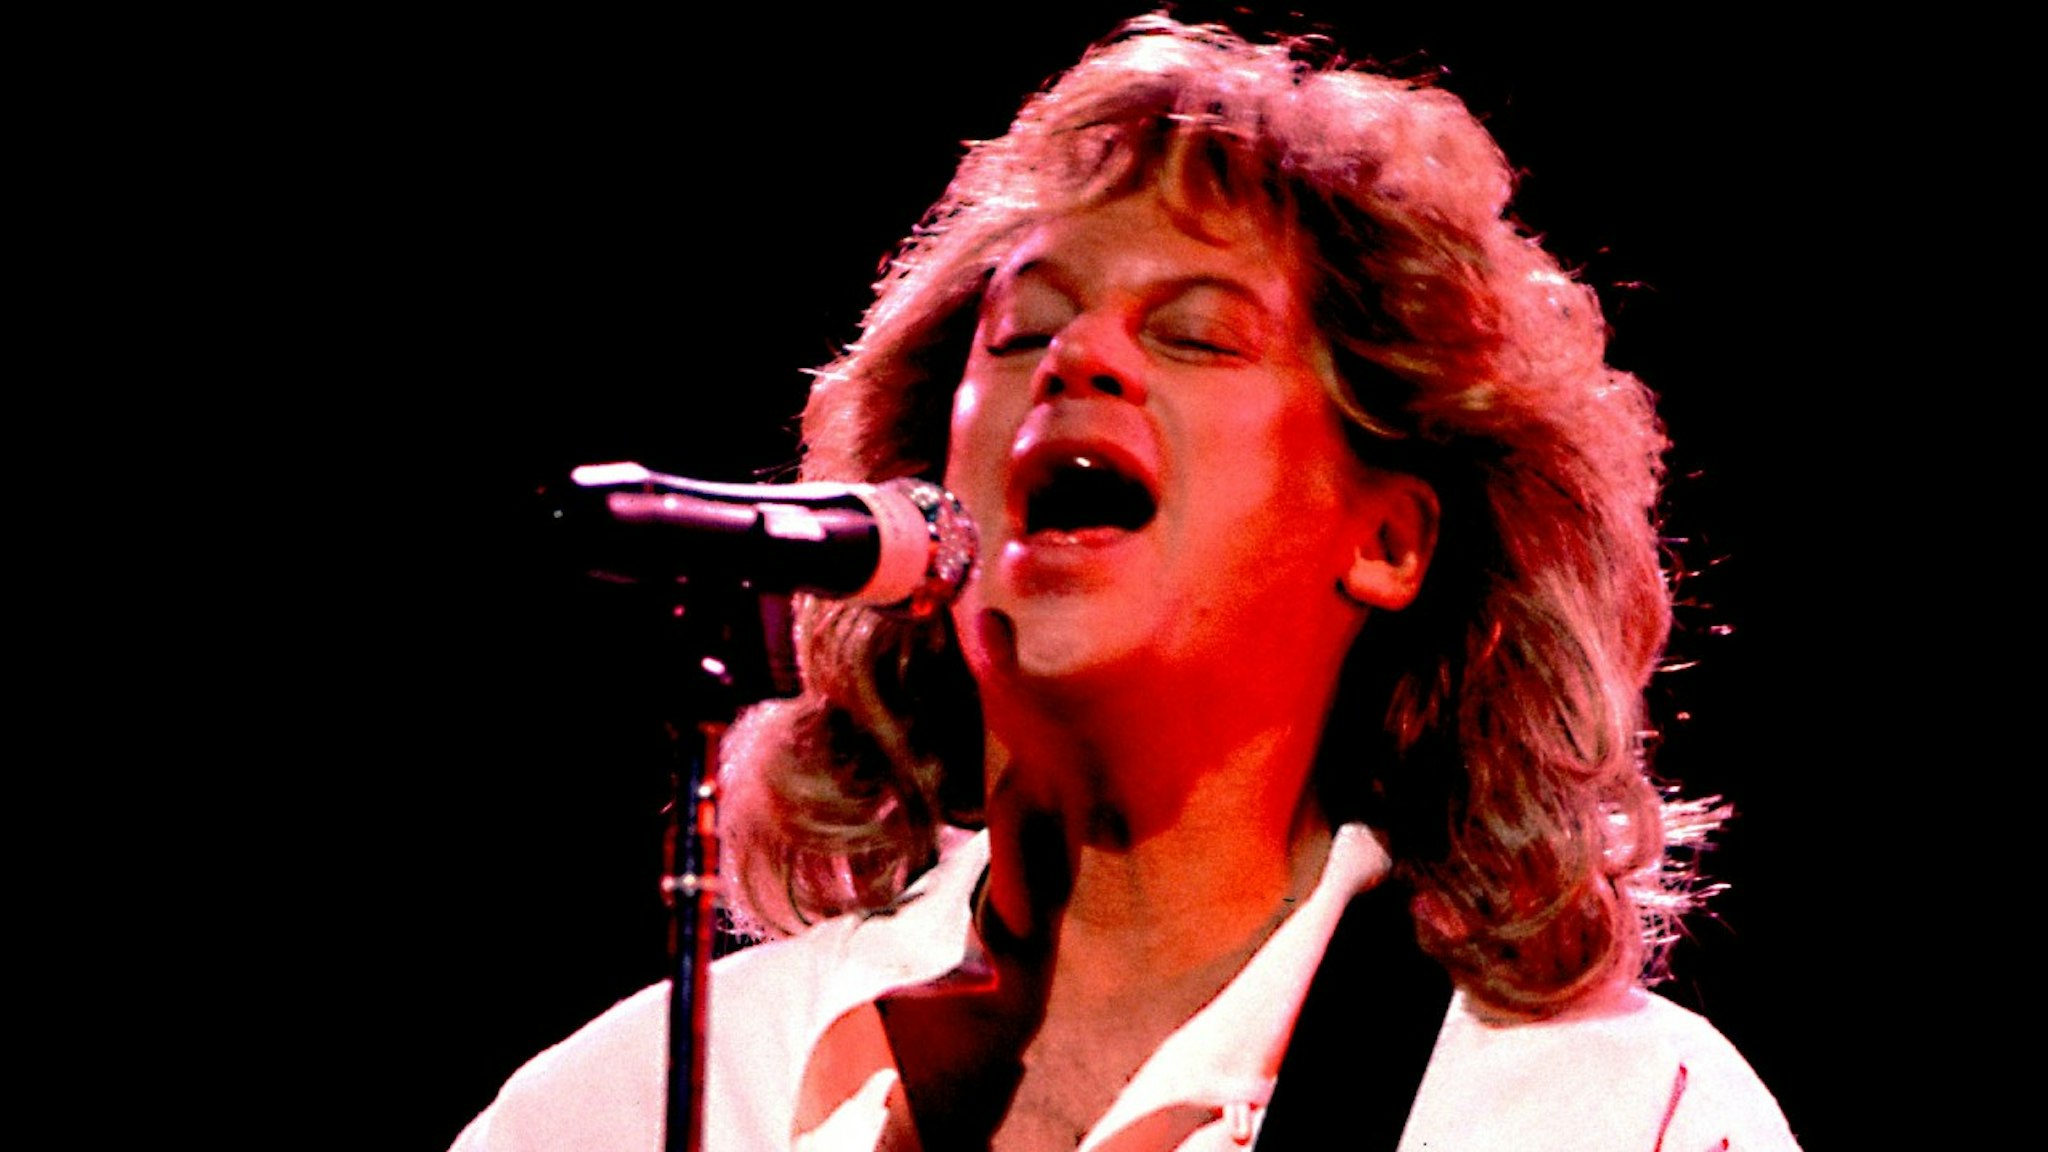 Eric Carmen on 6/26/88 in Chicago, Il.